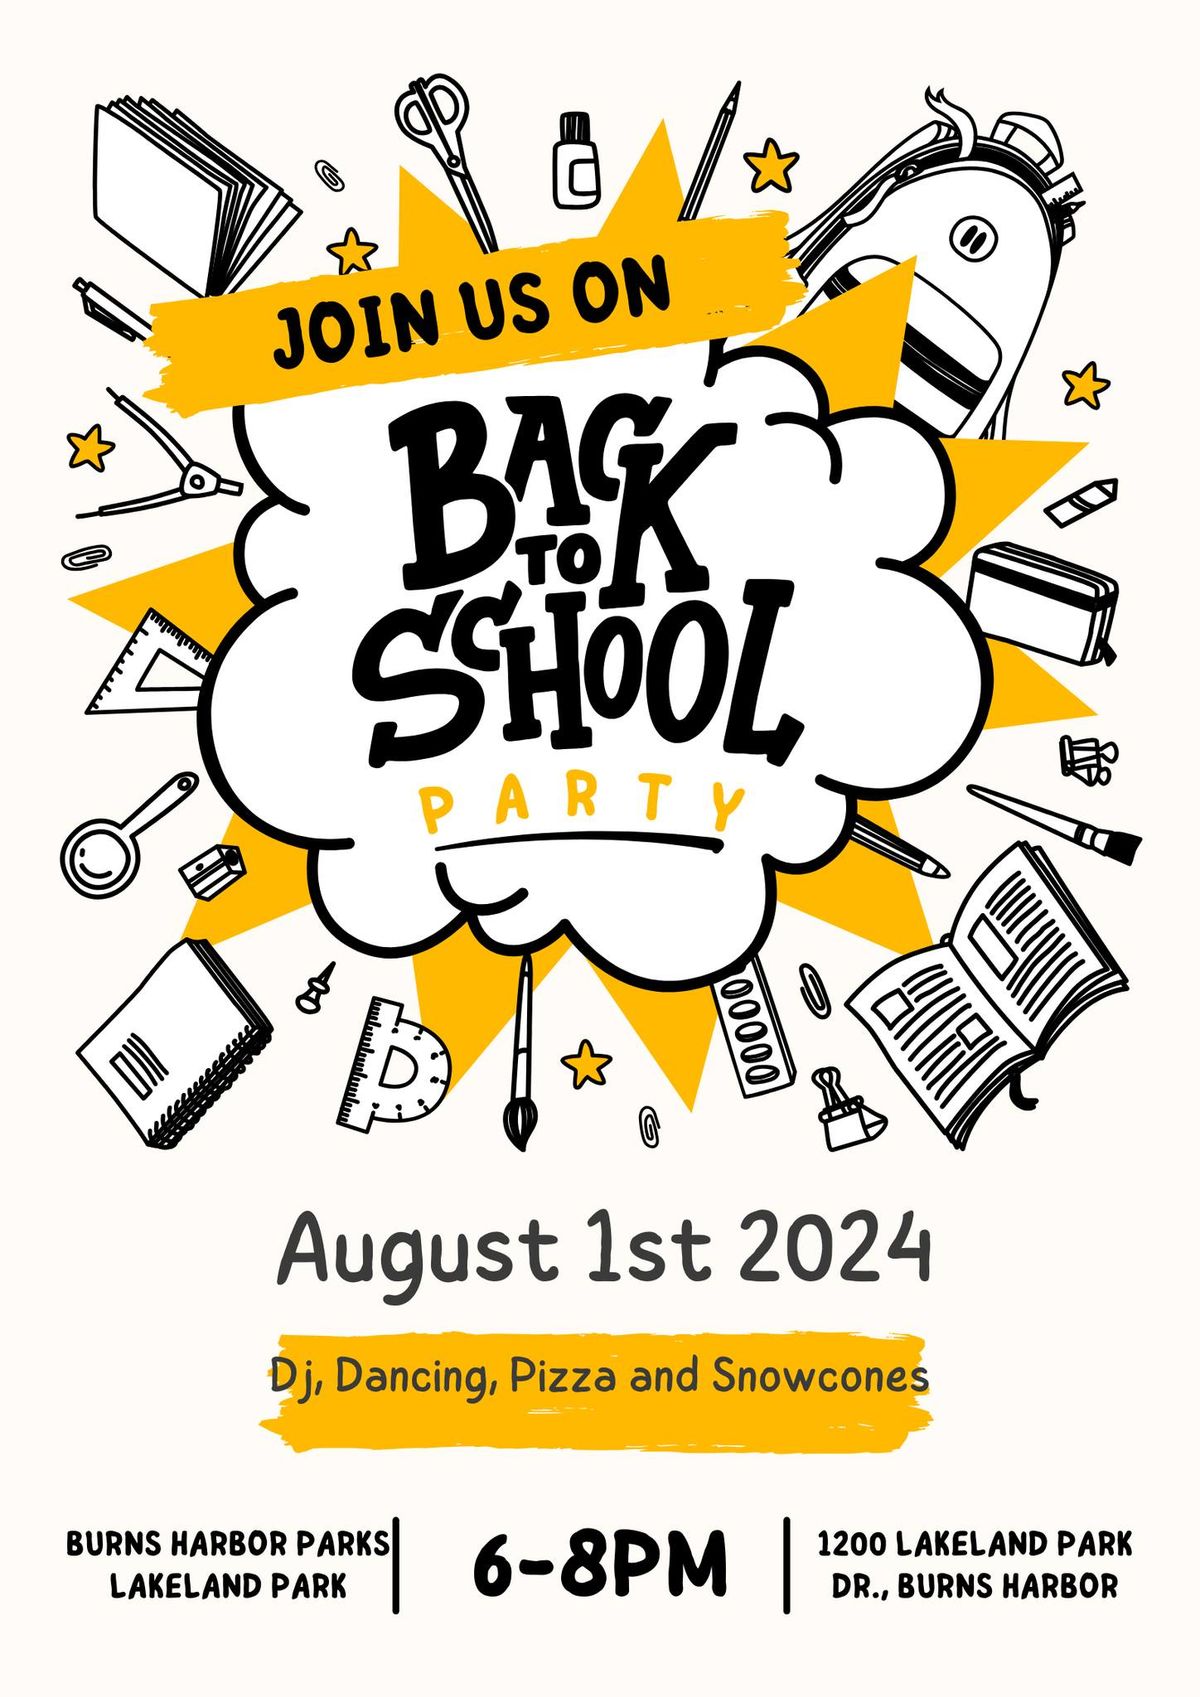 Back to School Party